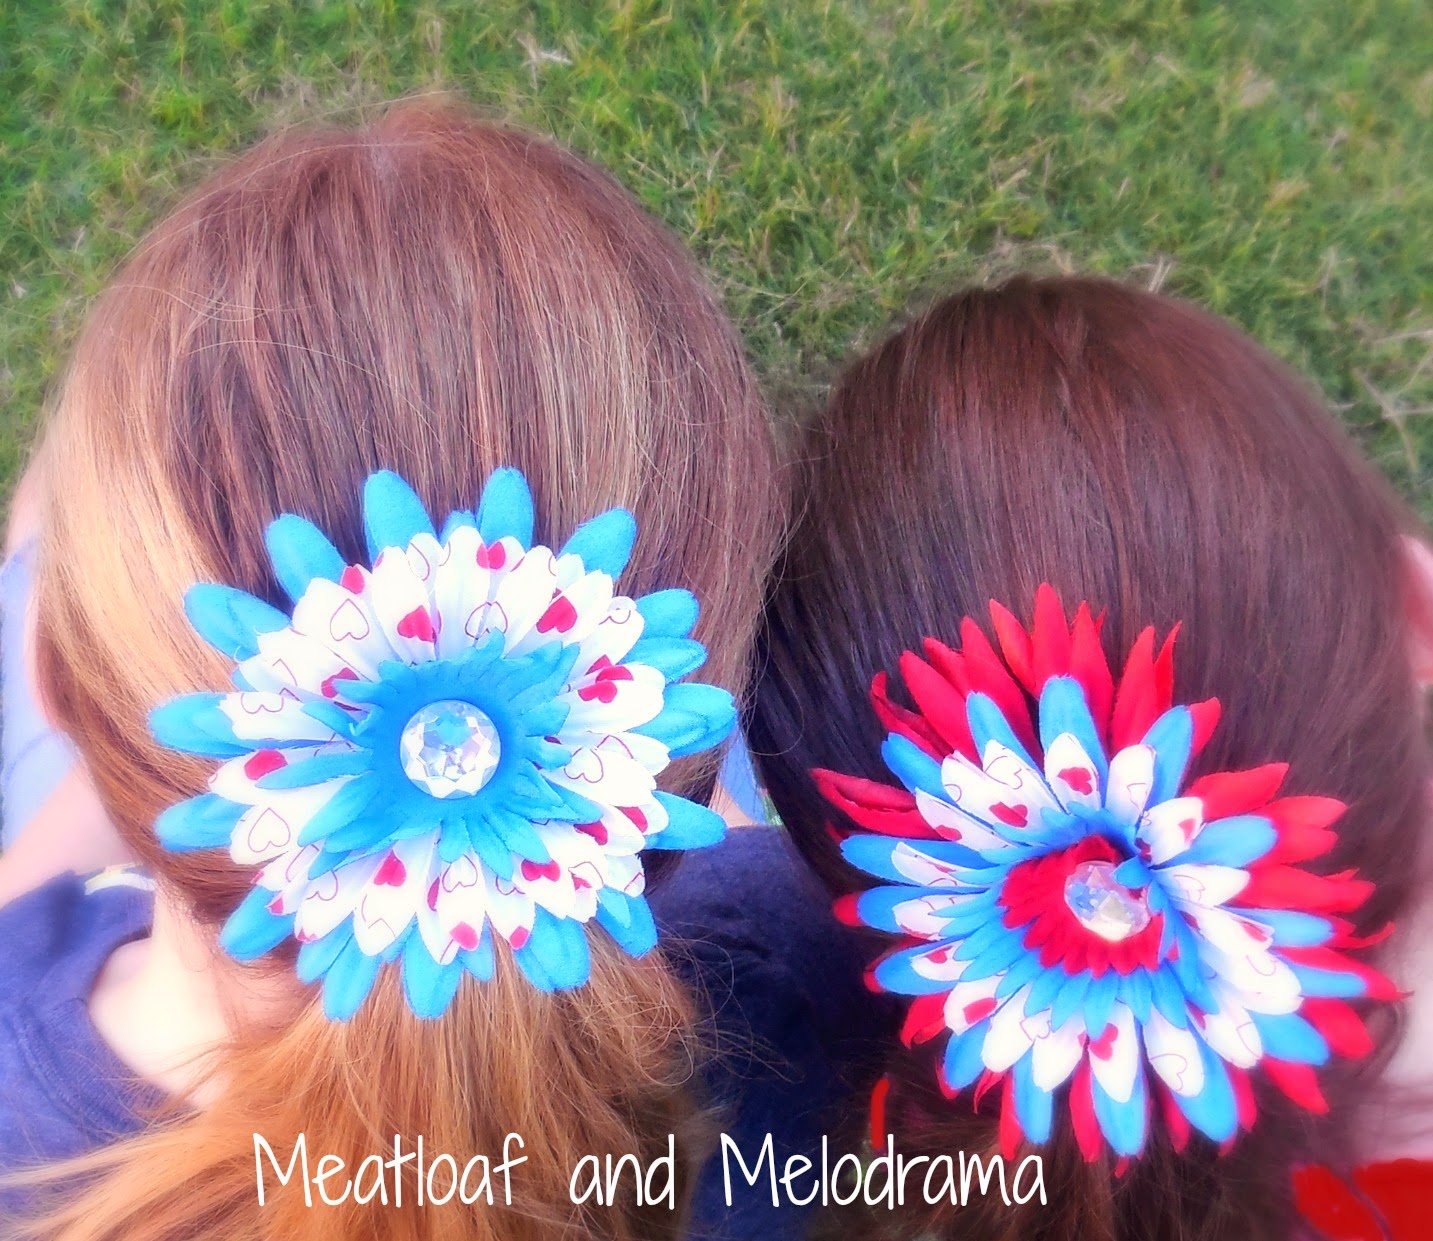 red, white and blue hair flower clips in girls hair